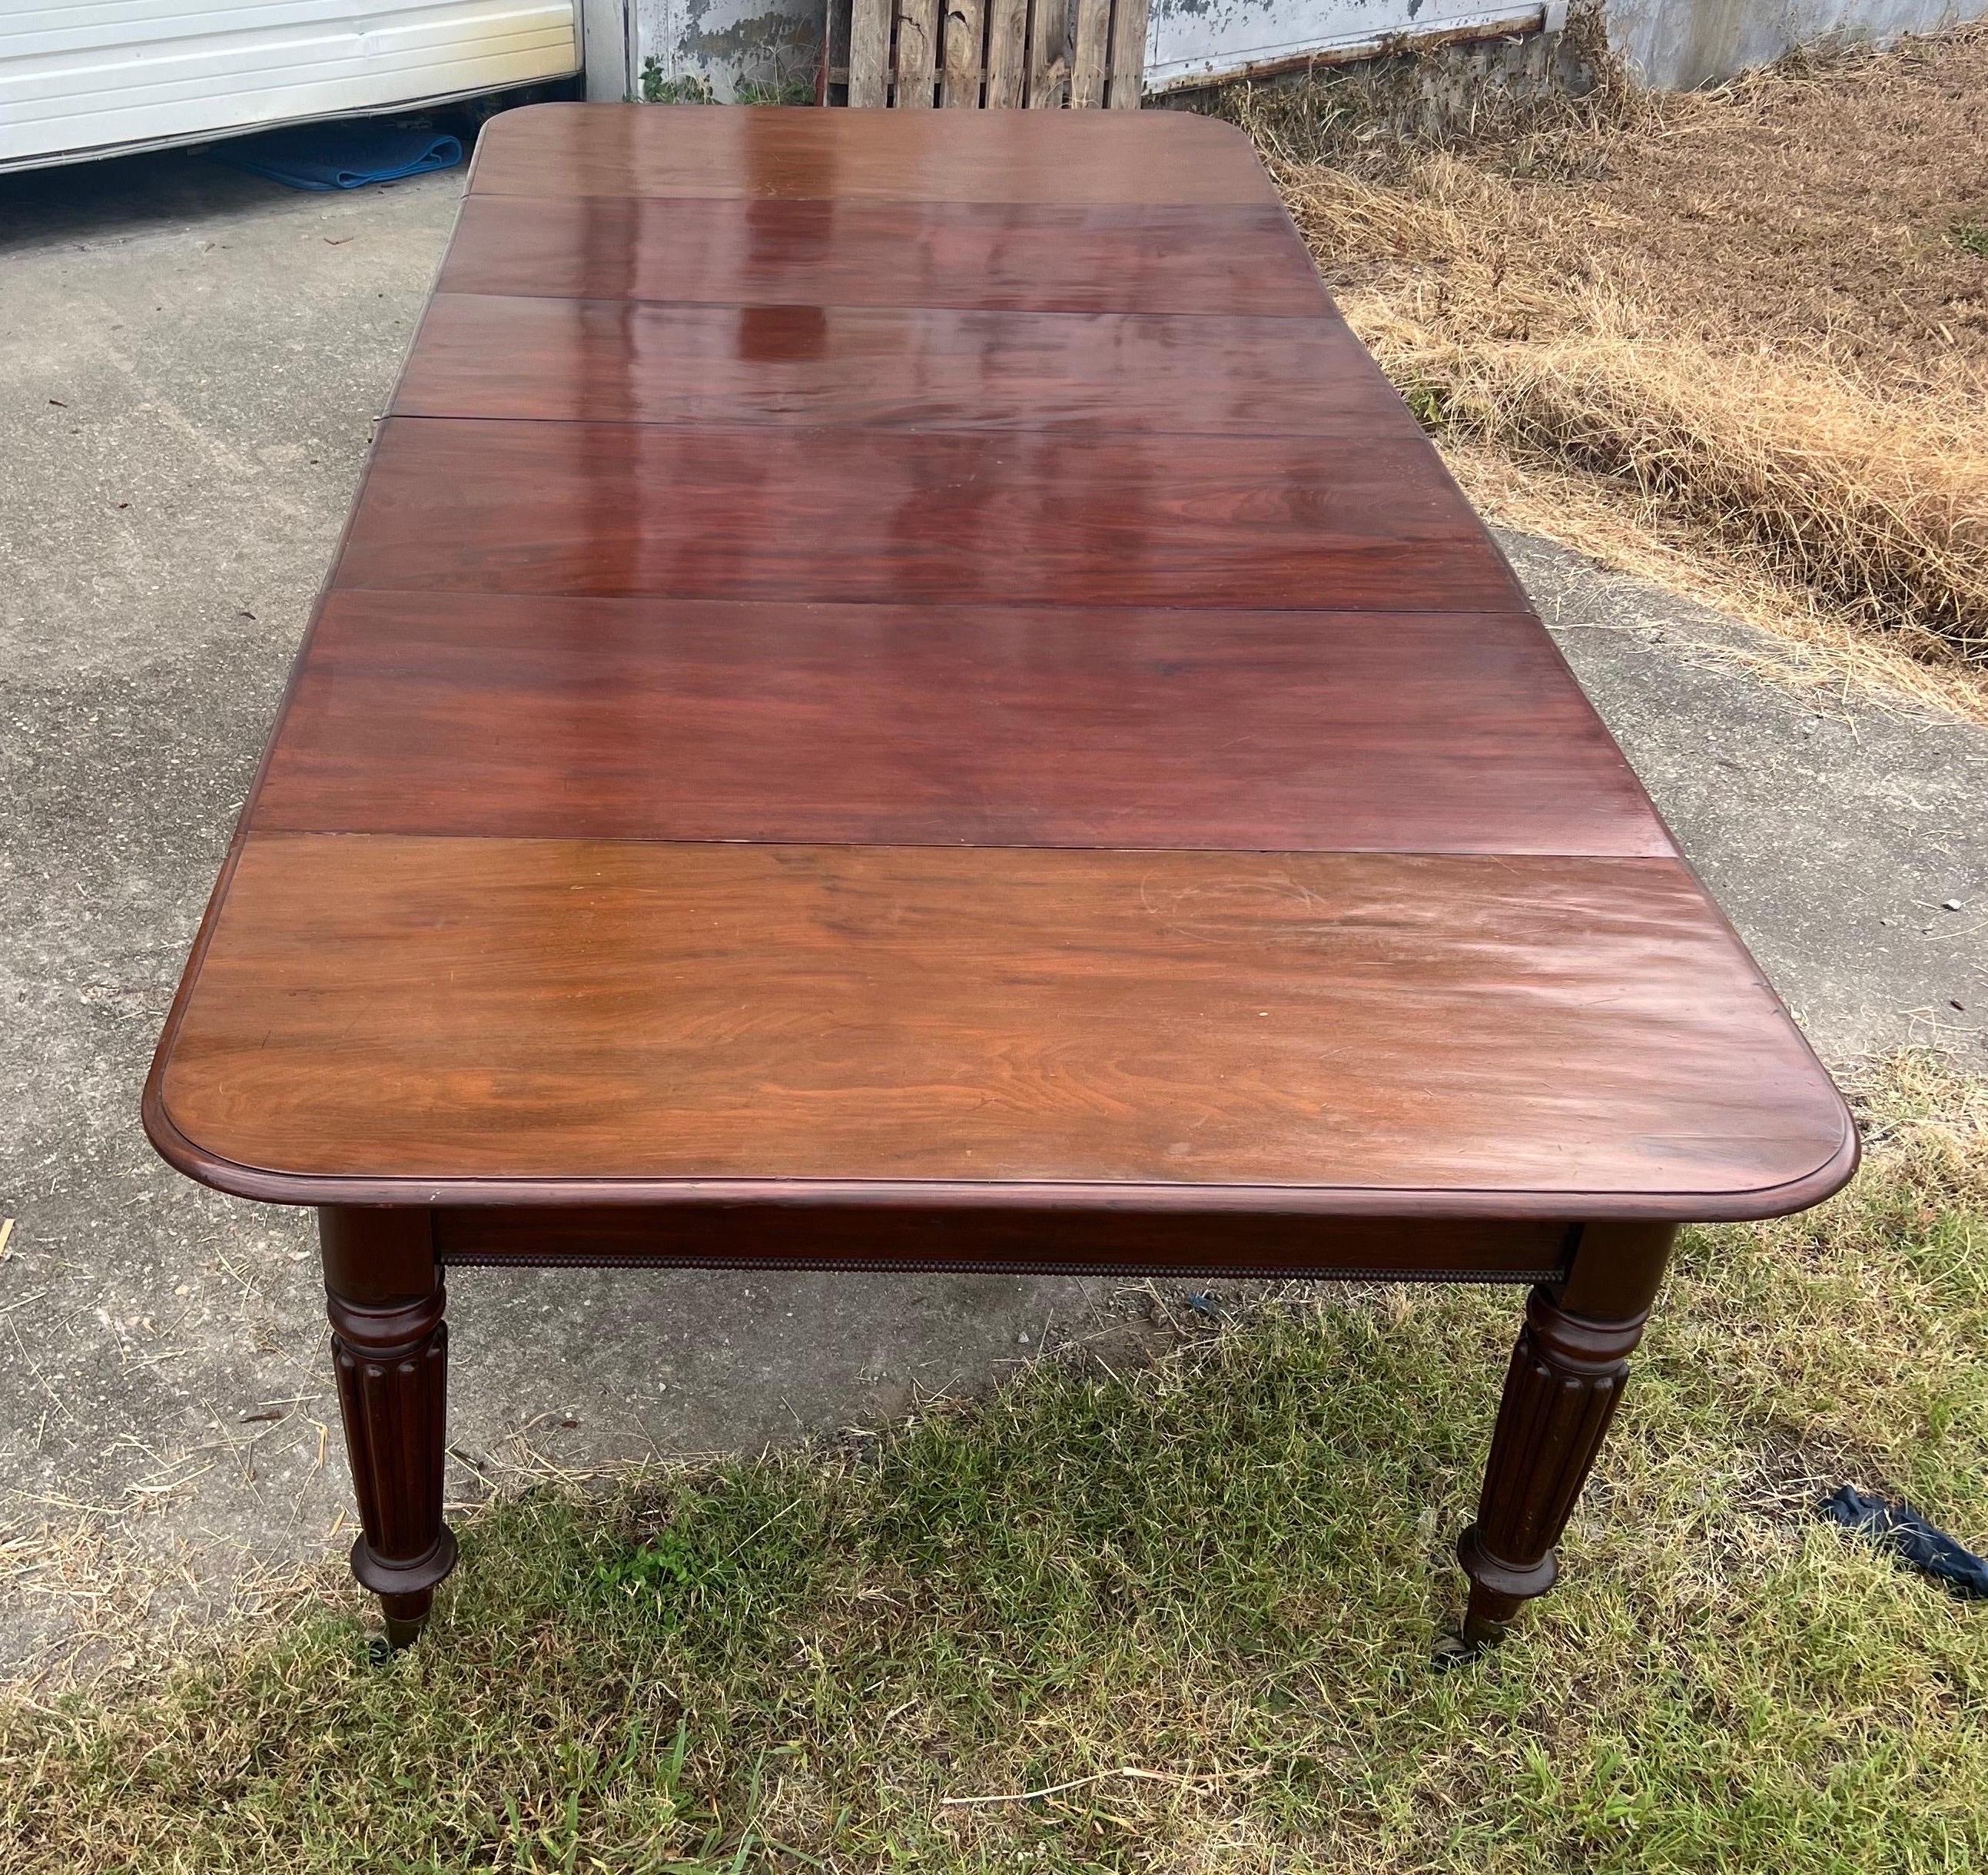 Impressive size and scale on this period 19th century English mahogany dining table, likely by made by Gillows in the 1st half of the 19th century. The table comes together similarly to the 